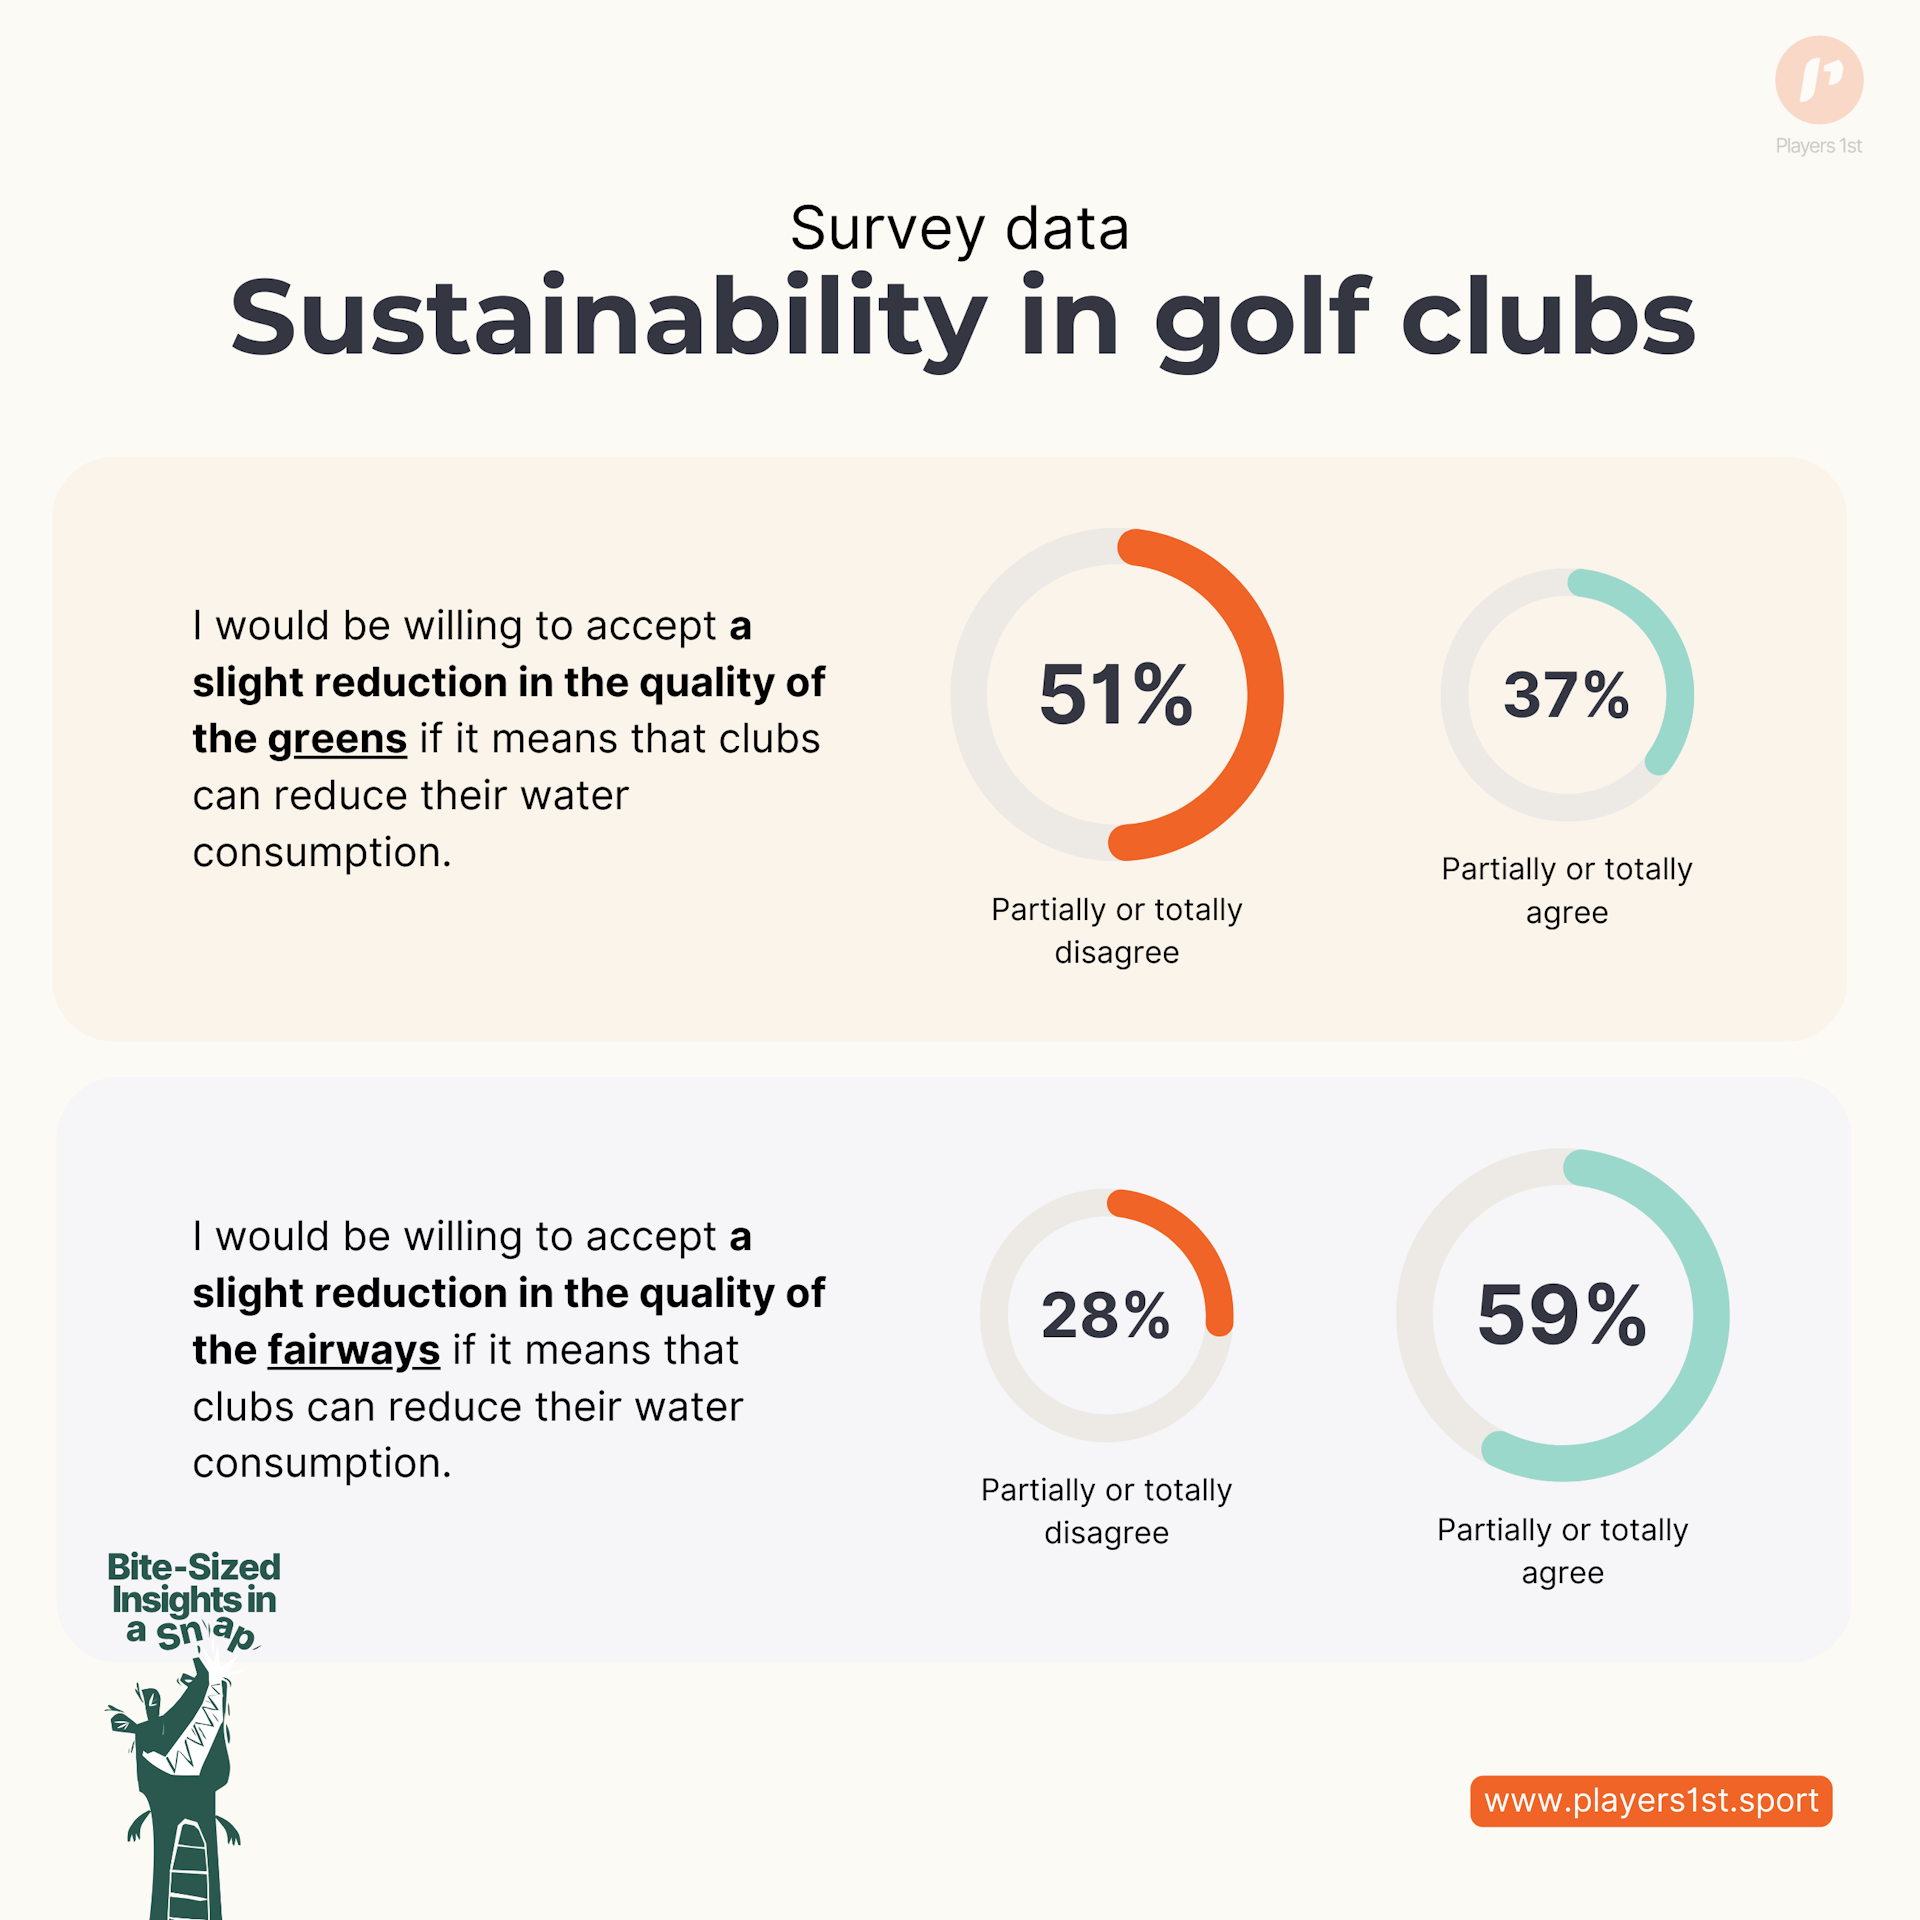 Golfers perspective on water saving and their influence on greens and fairways.